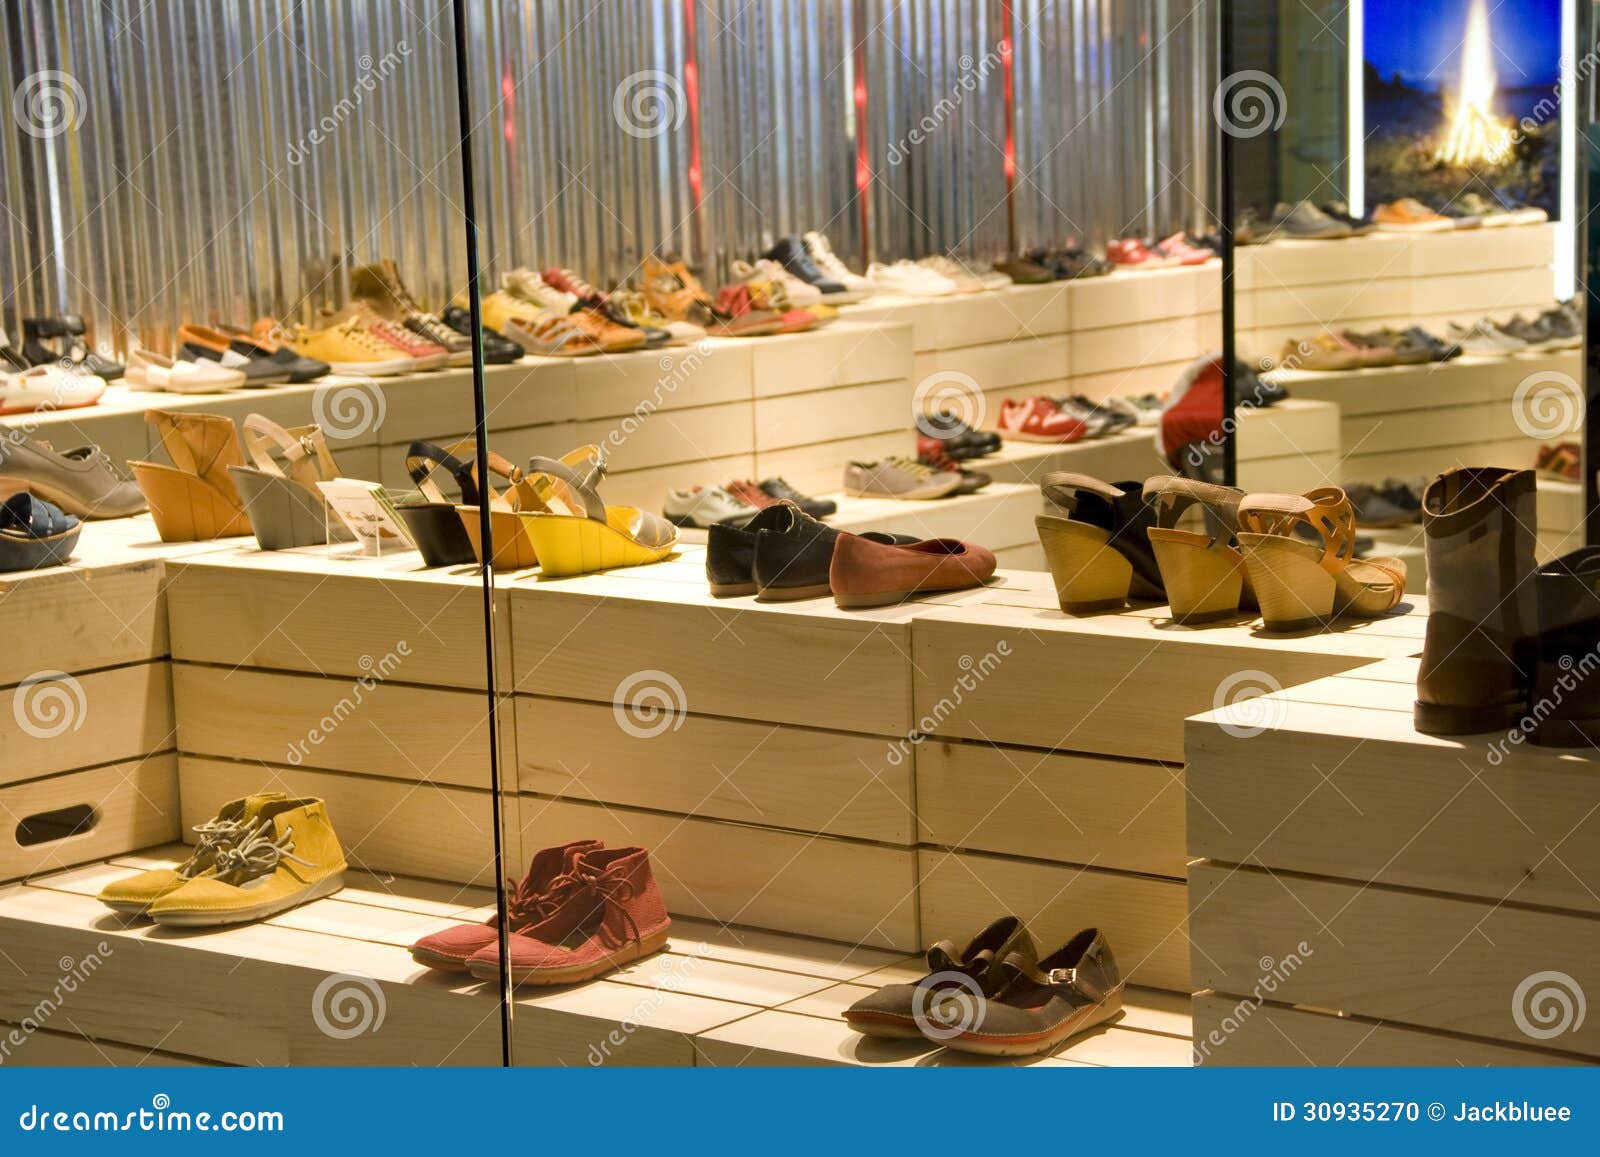 Shoe store stock photo. Image of black, retails, brown - 30935270